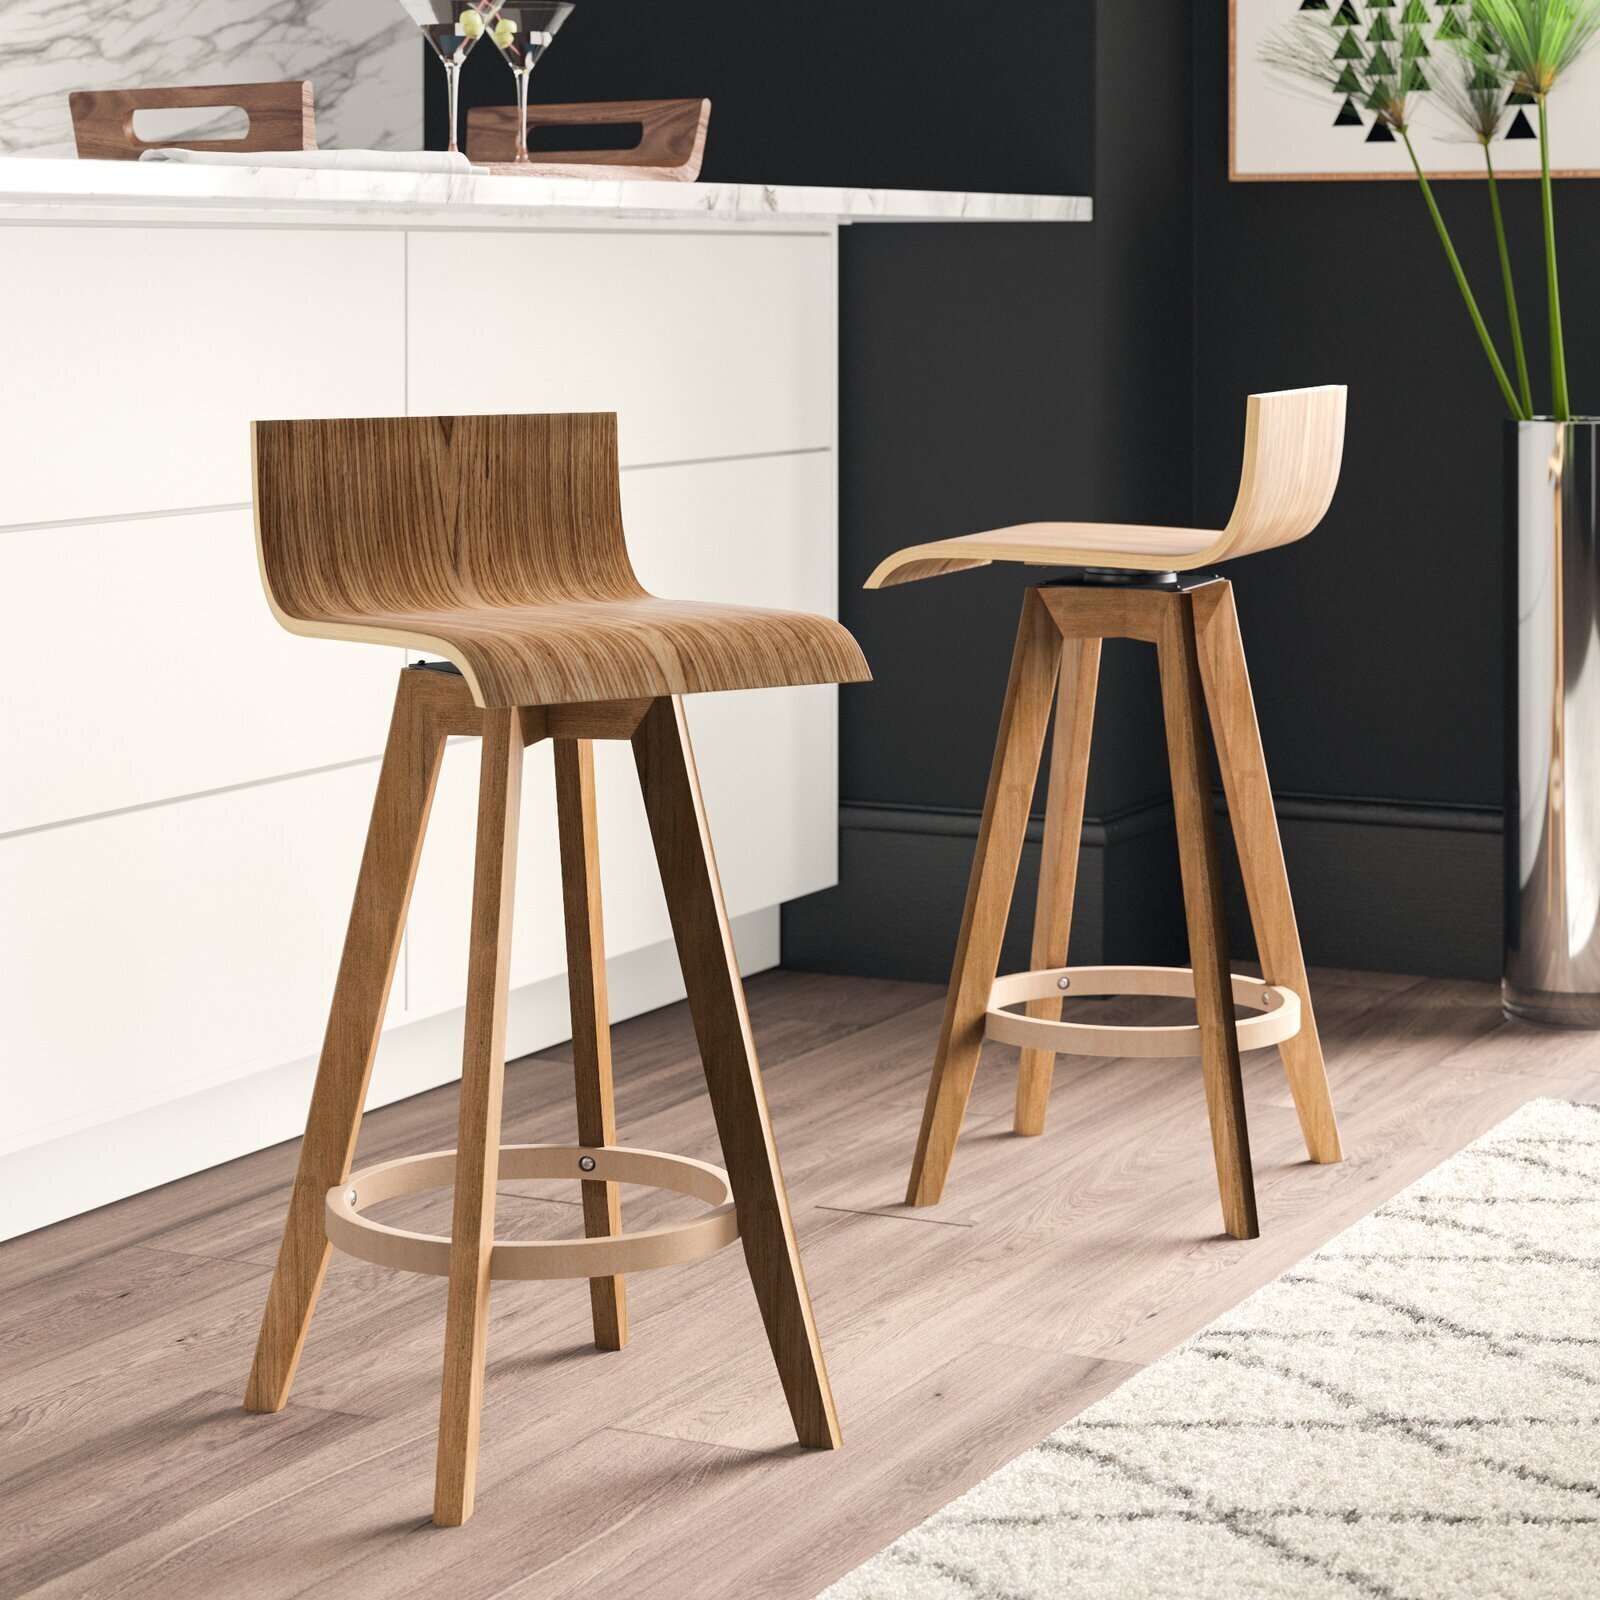 Modern Wooden Counter Stools with Backs